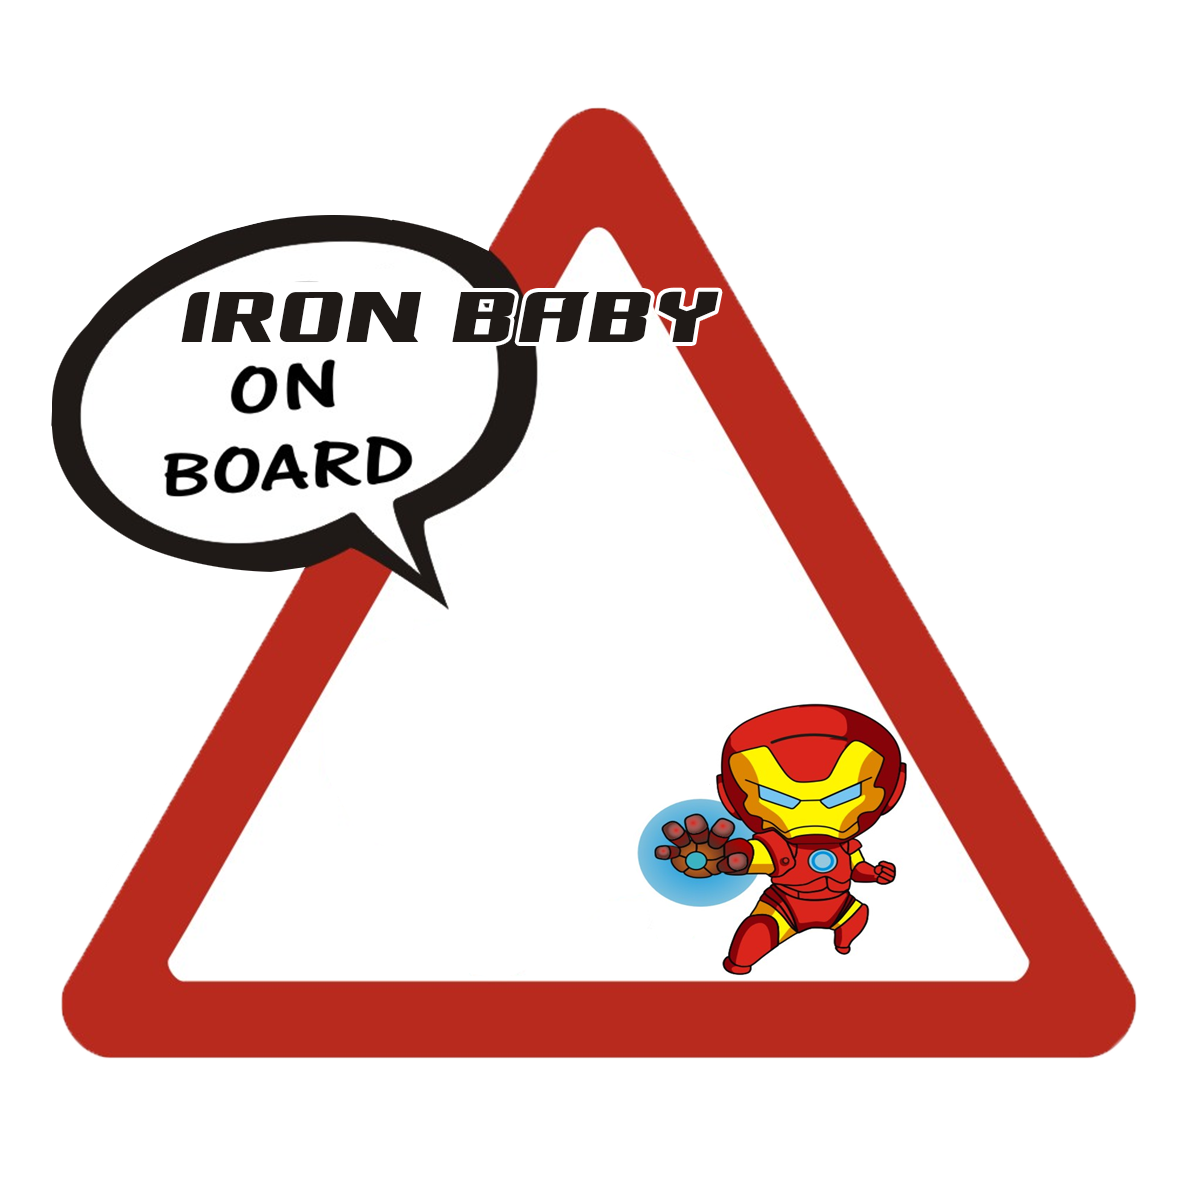 Personalised Iron baby on board Safety Sticker Car Vinyl Stickers Decals Accessories